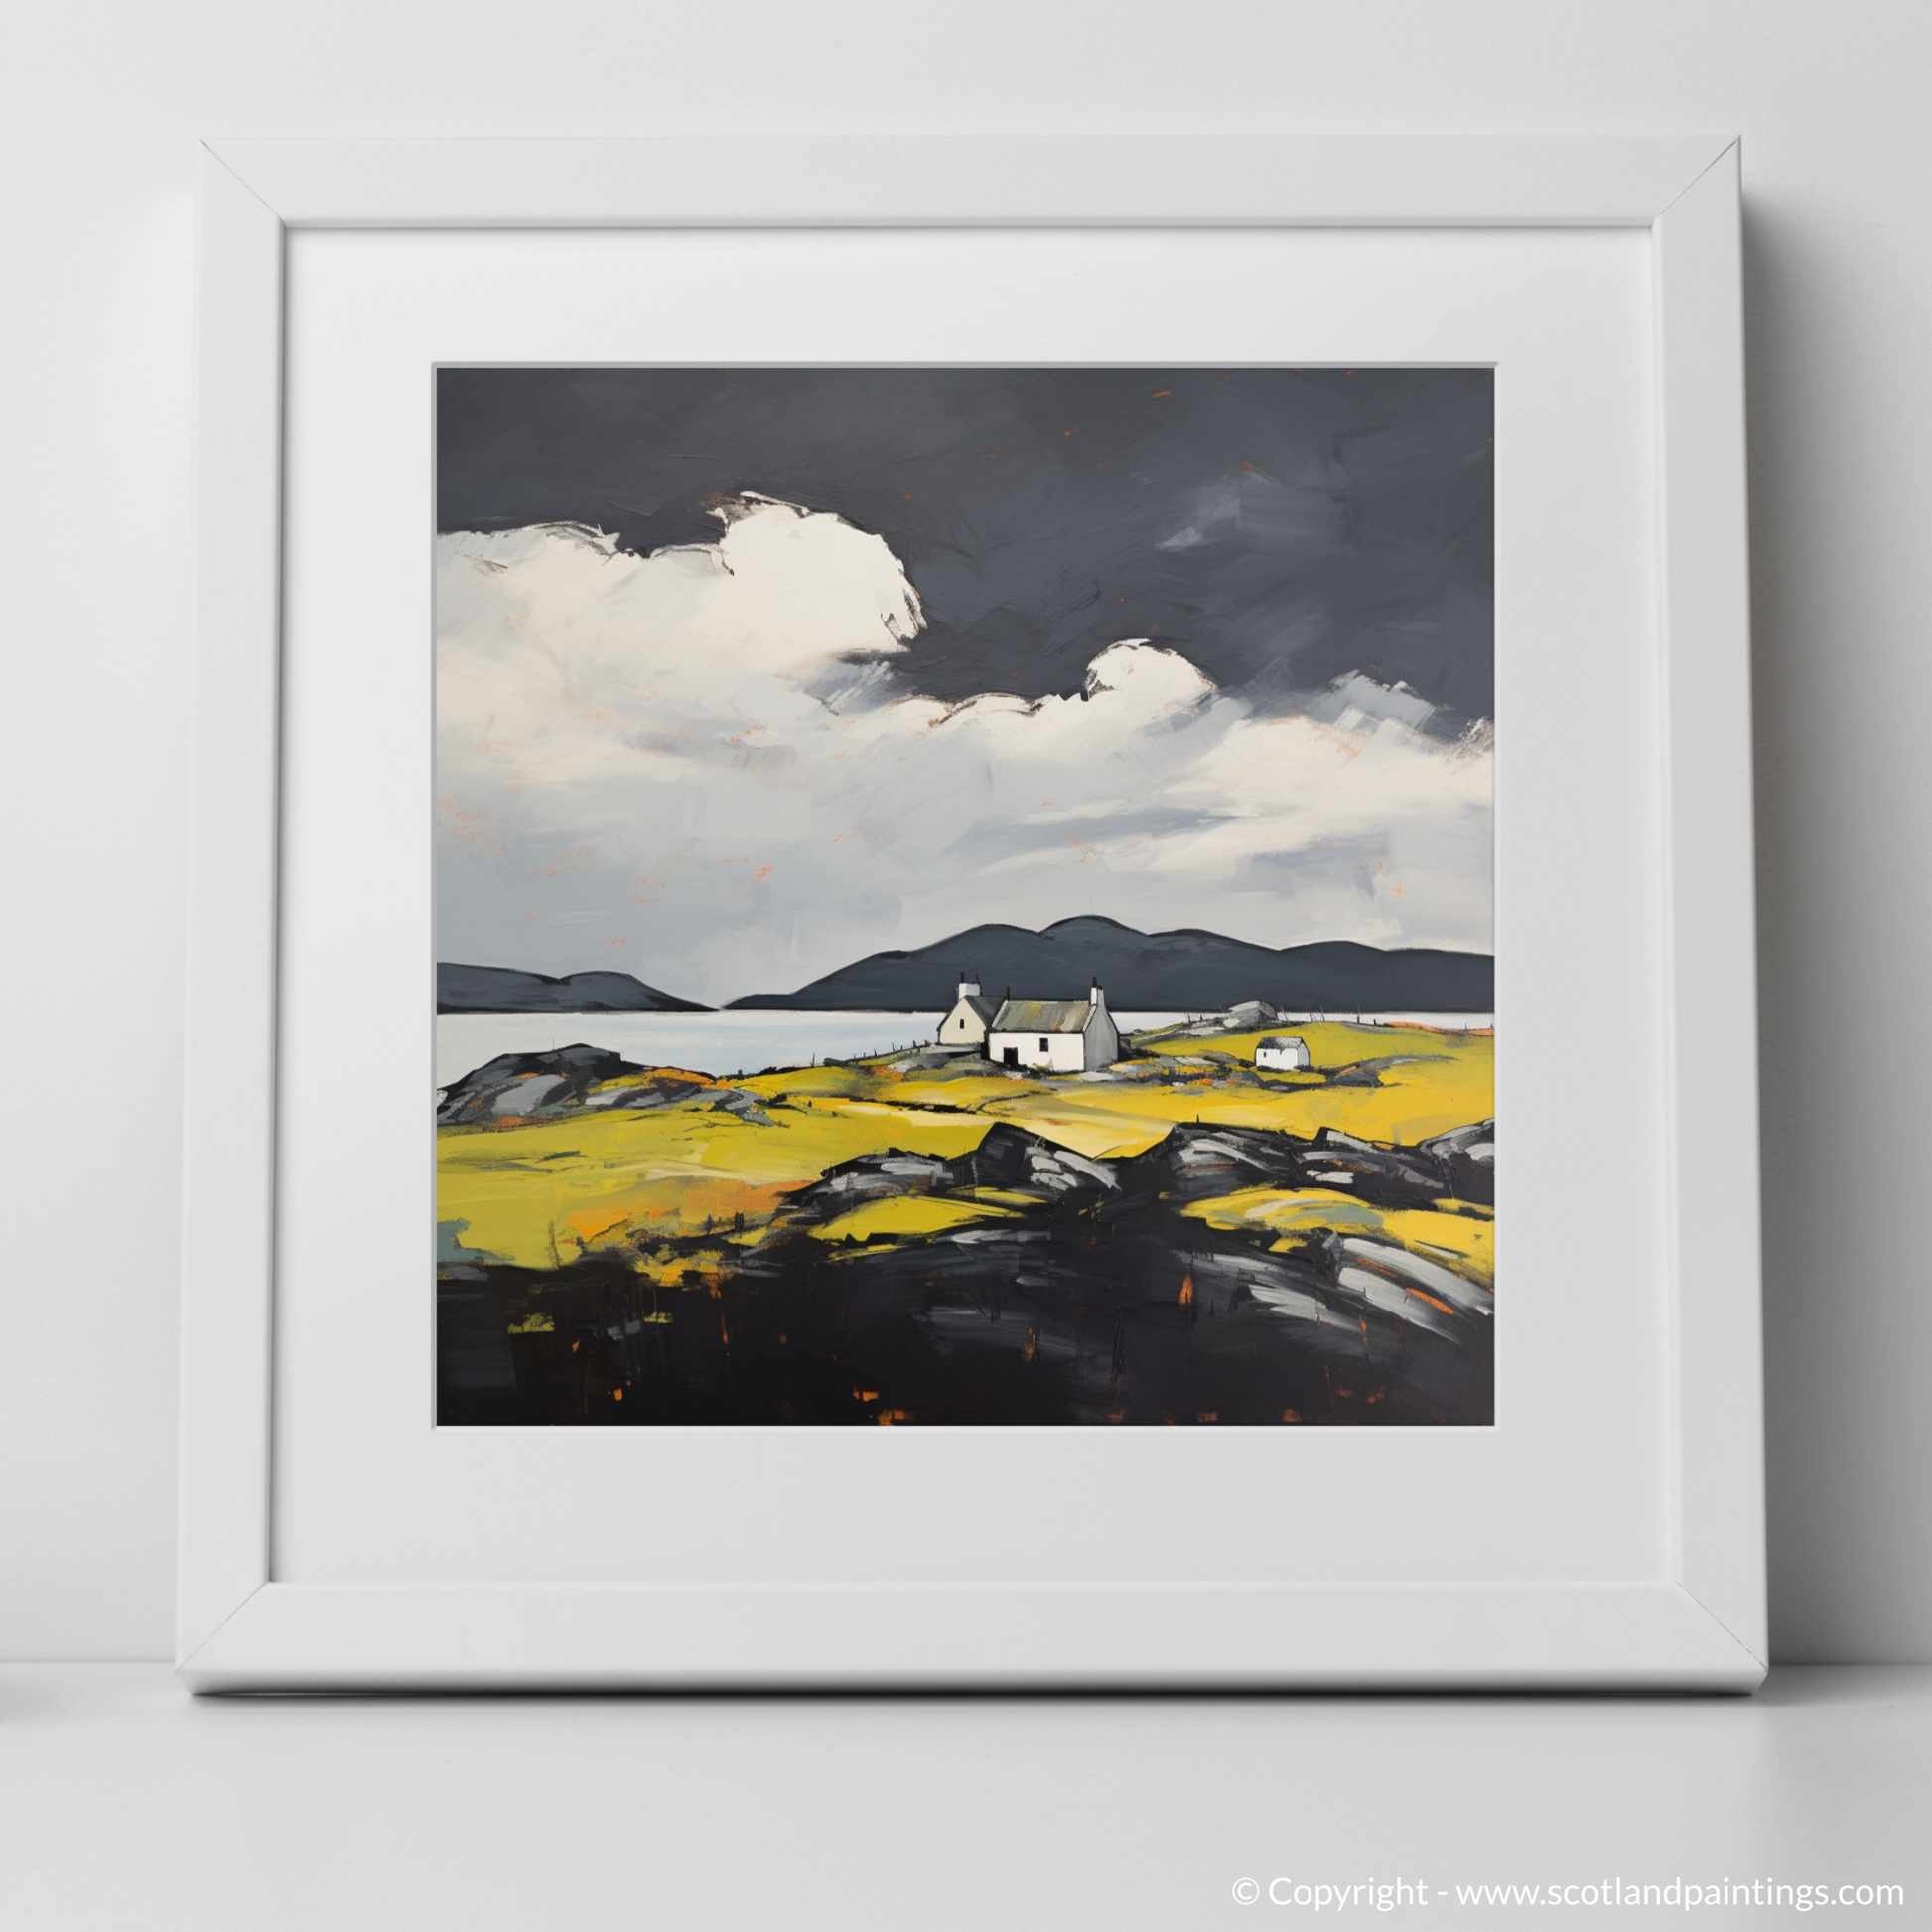 Art Print of Isle of Barra, Outer Hebrides with a white frame